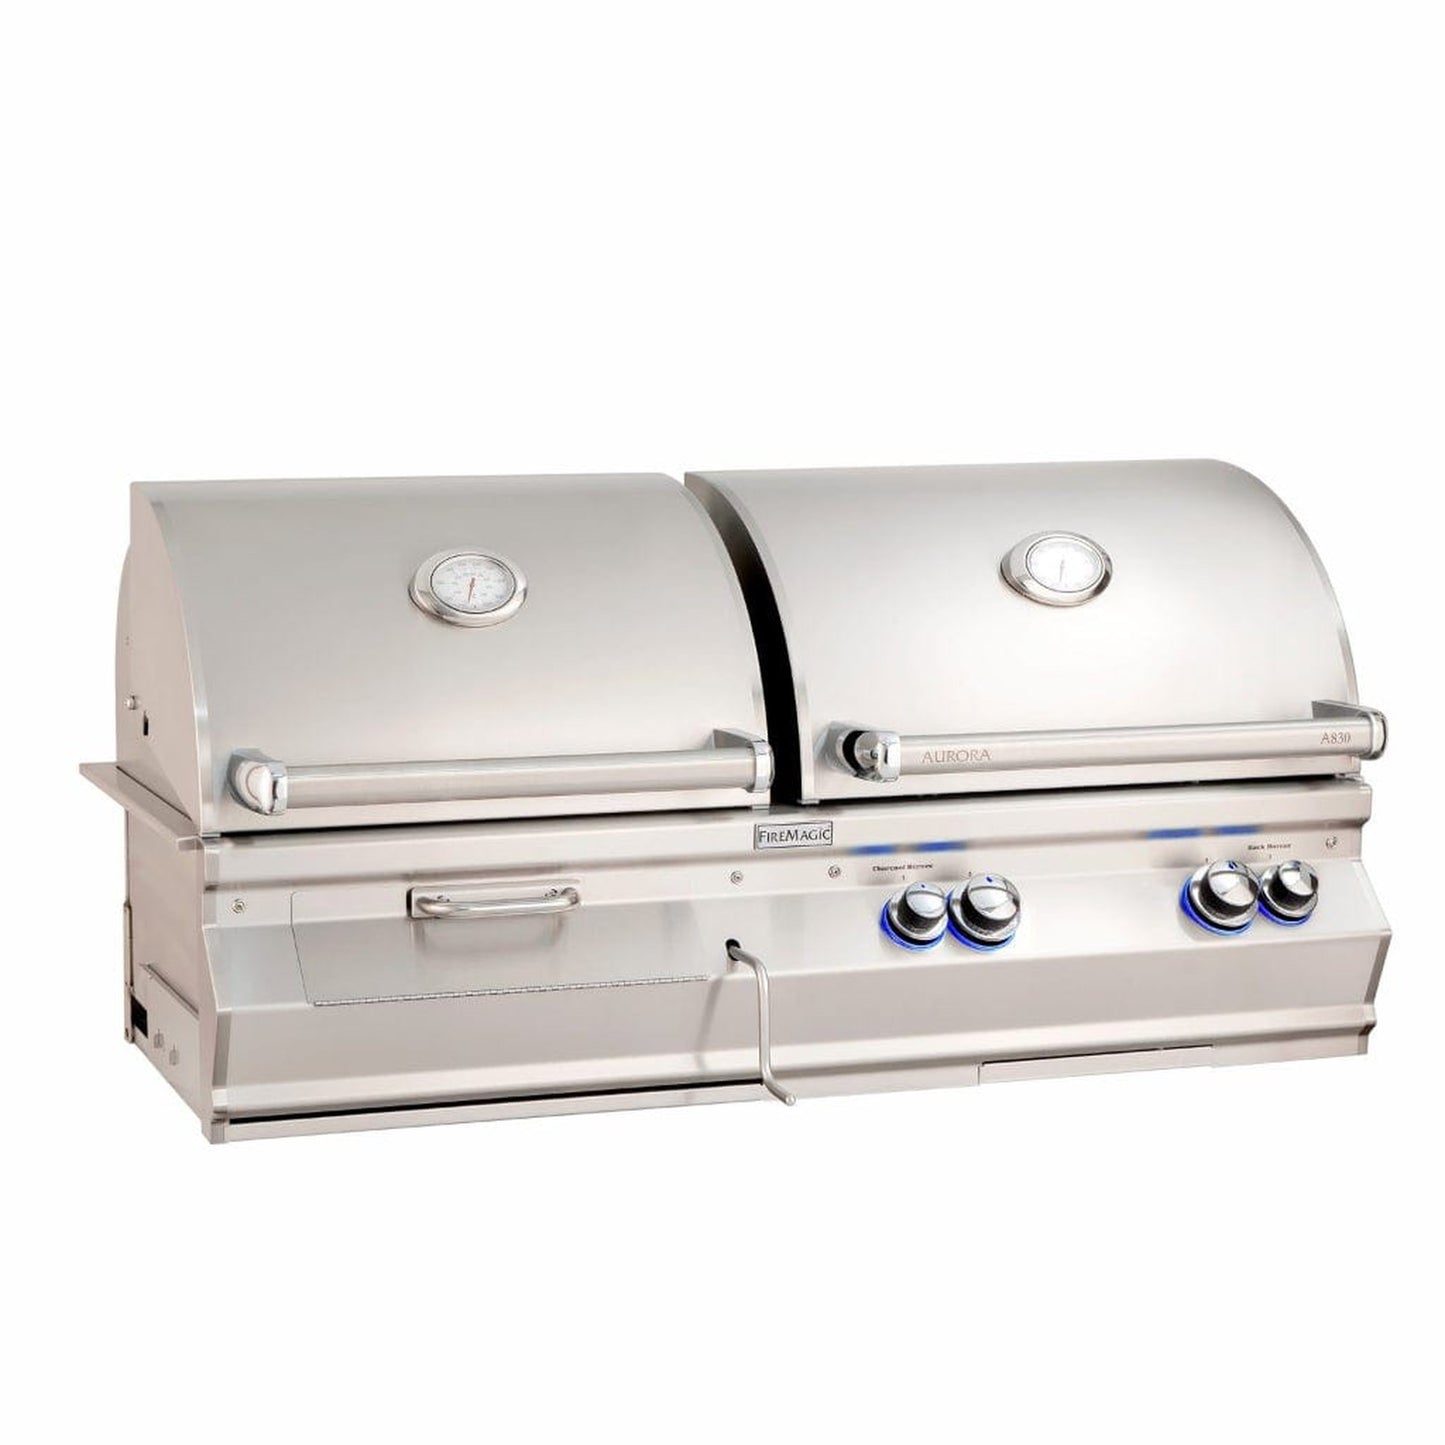 Fire Magic 46" 3-Burner Aurora A830i Built-In Gas/Charcoal Combo Grills w/ Analog Thermometers